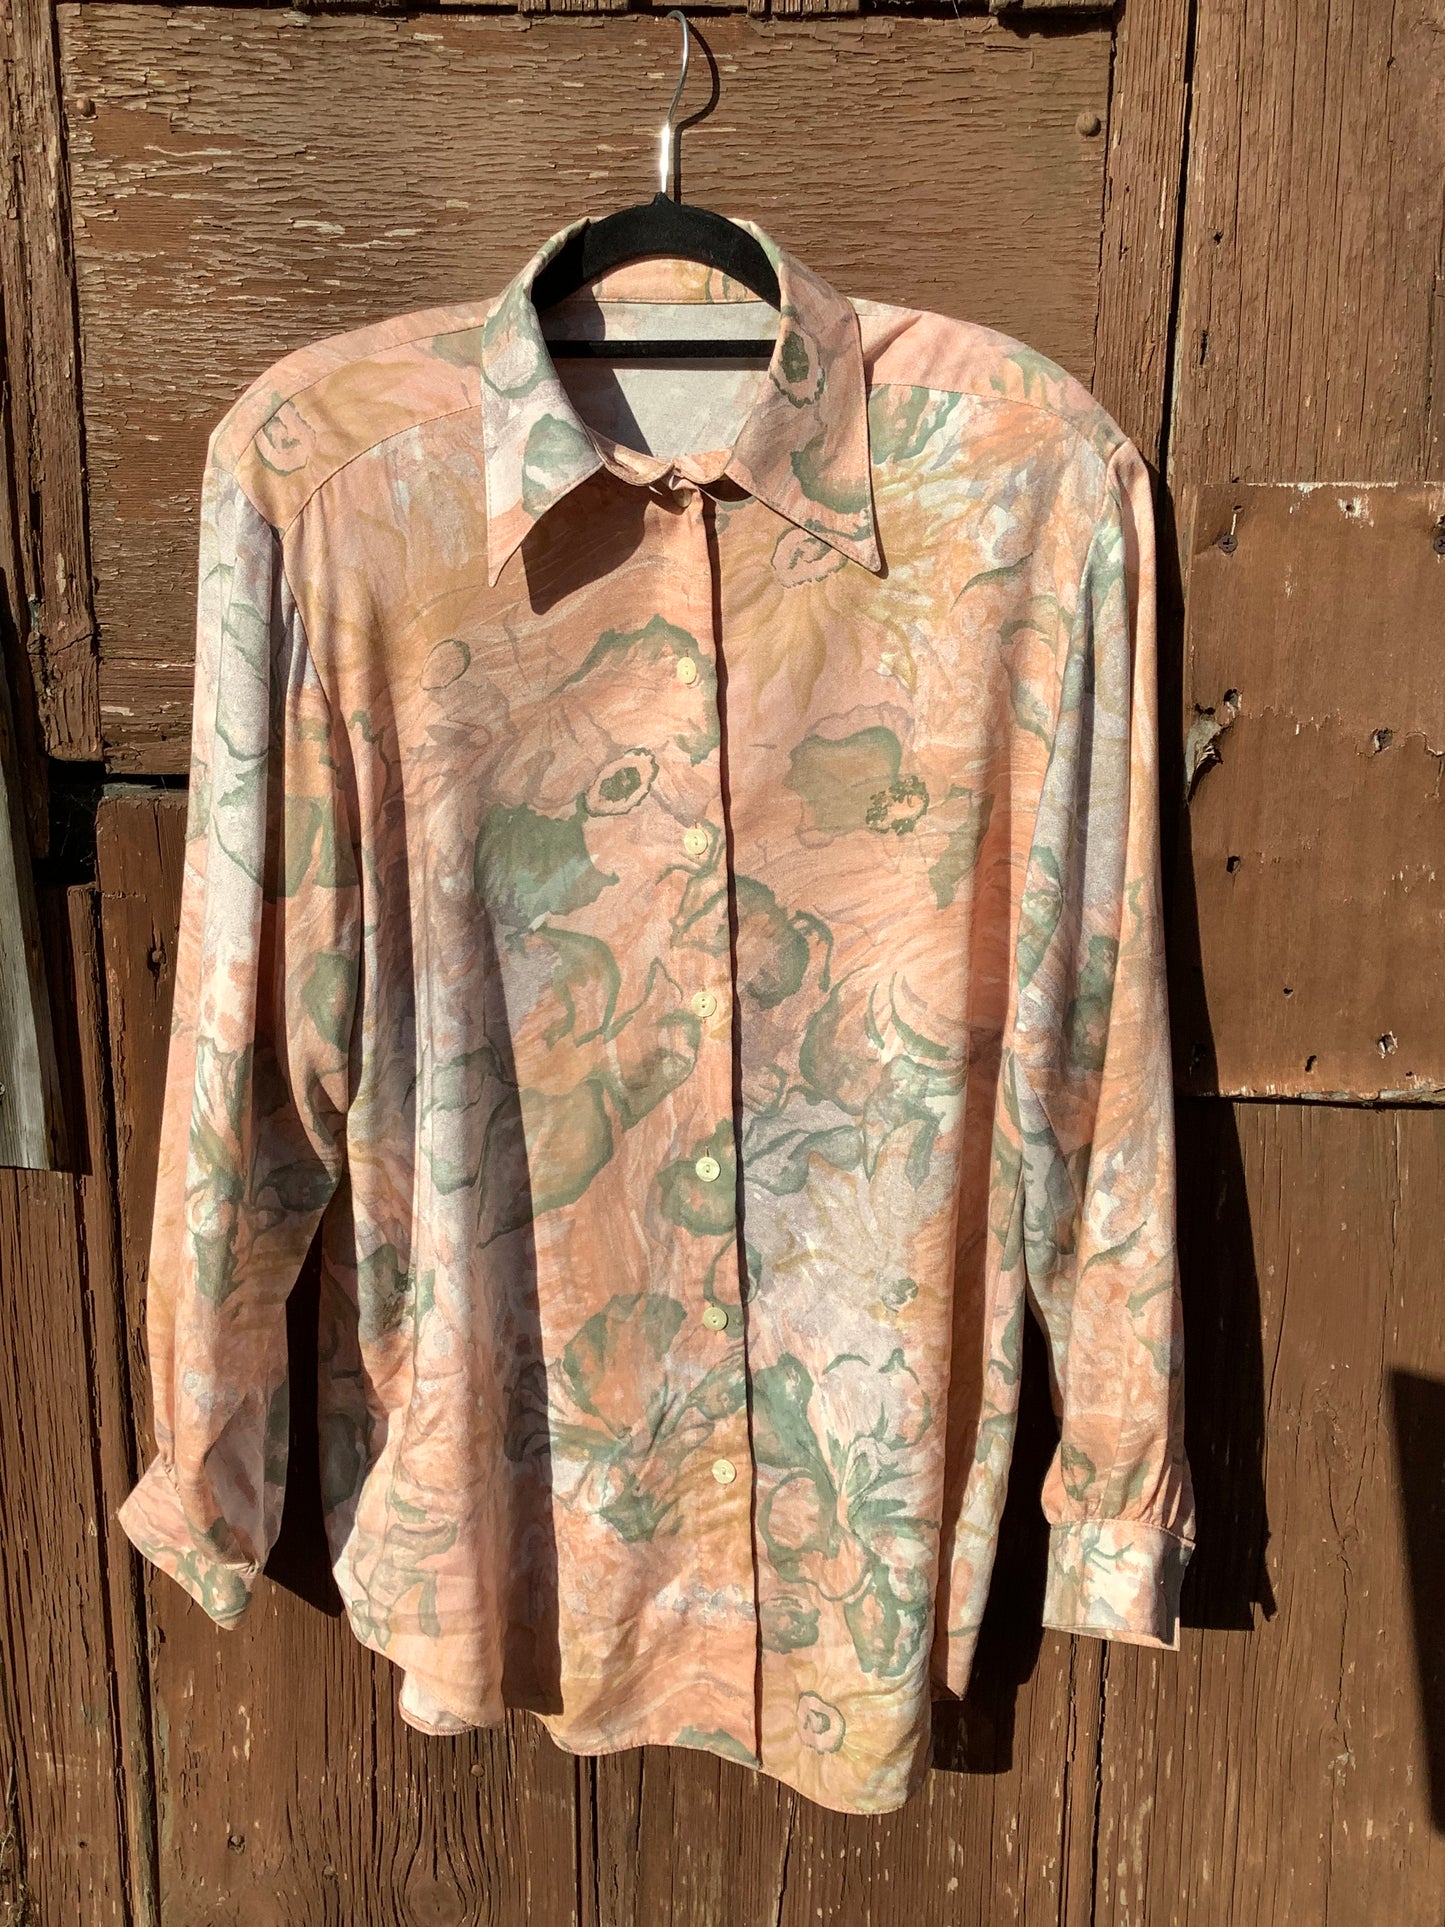 Vintage 90’s pastel abstract pattern oversized shirt